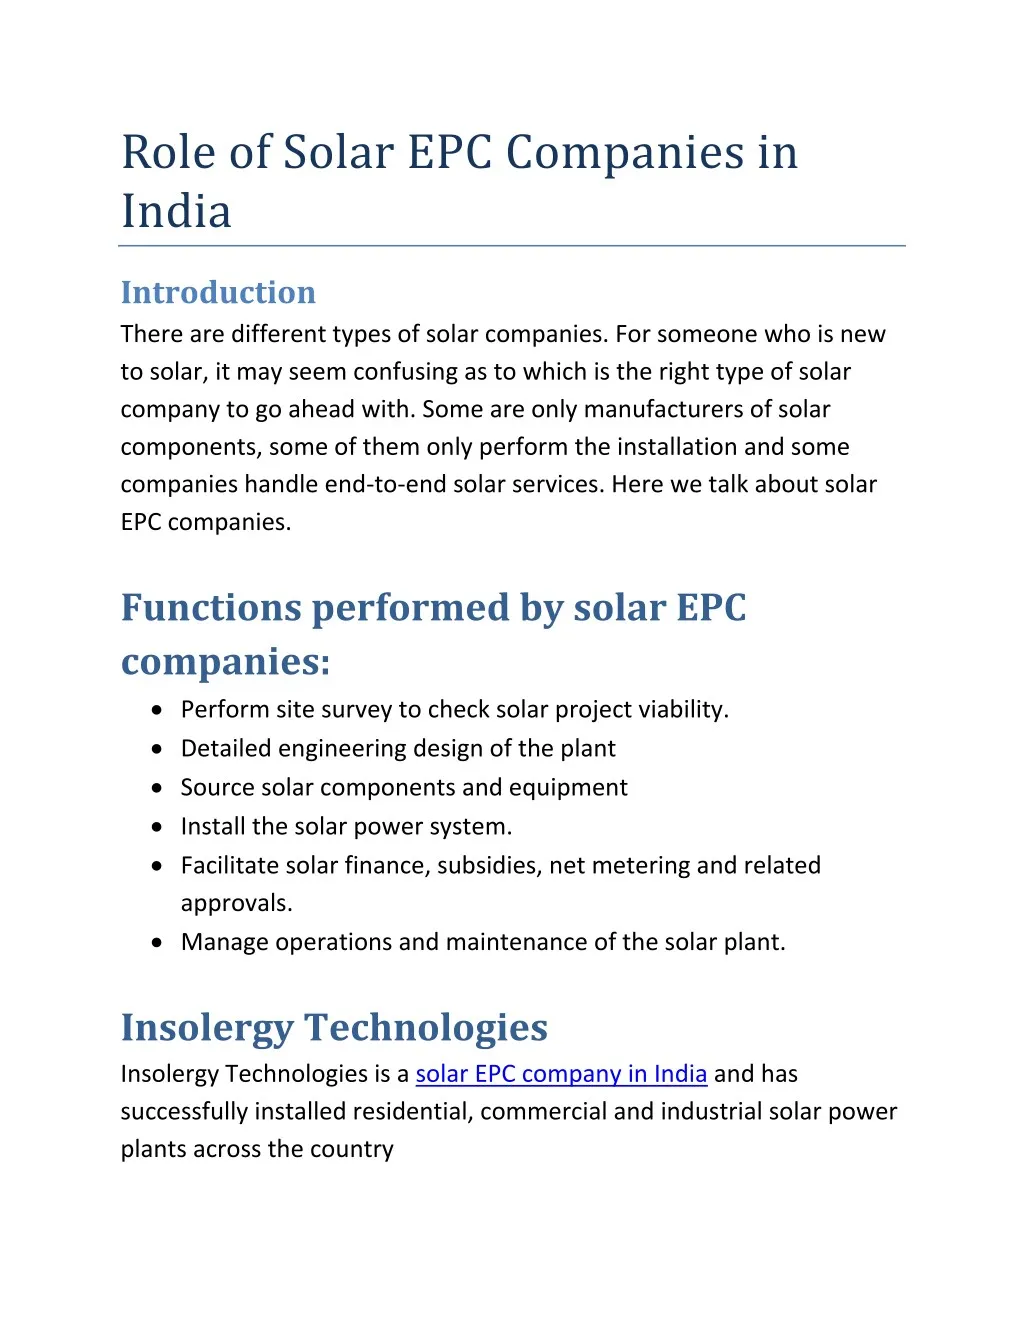 role of solar epc companies in india